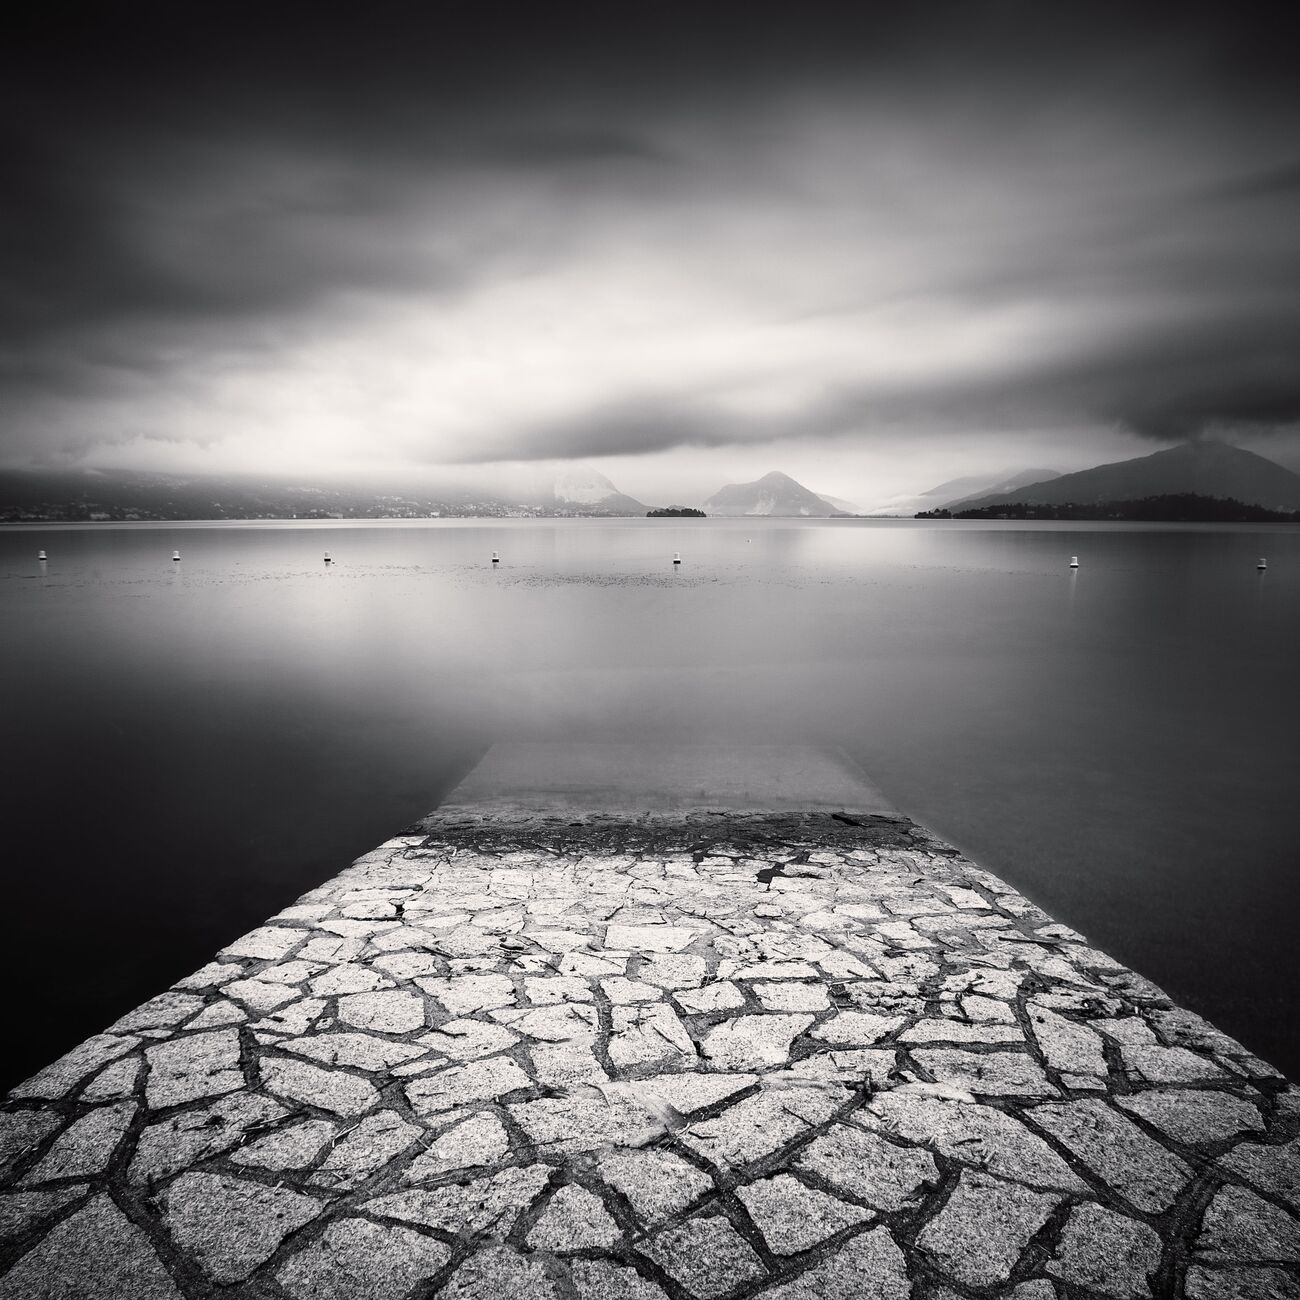 Paved Ramp, Etude 2, Lake Maggiore, Italy. August 2014. Ref-11534 - Denis Olivier Photography